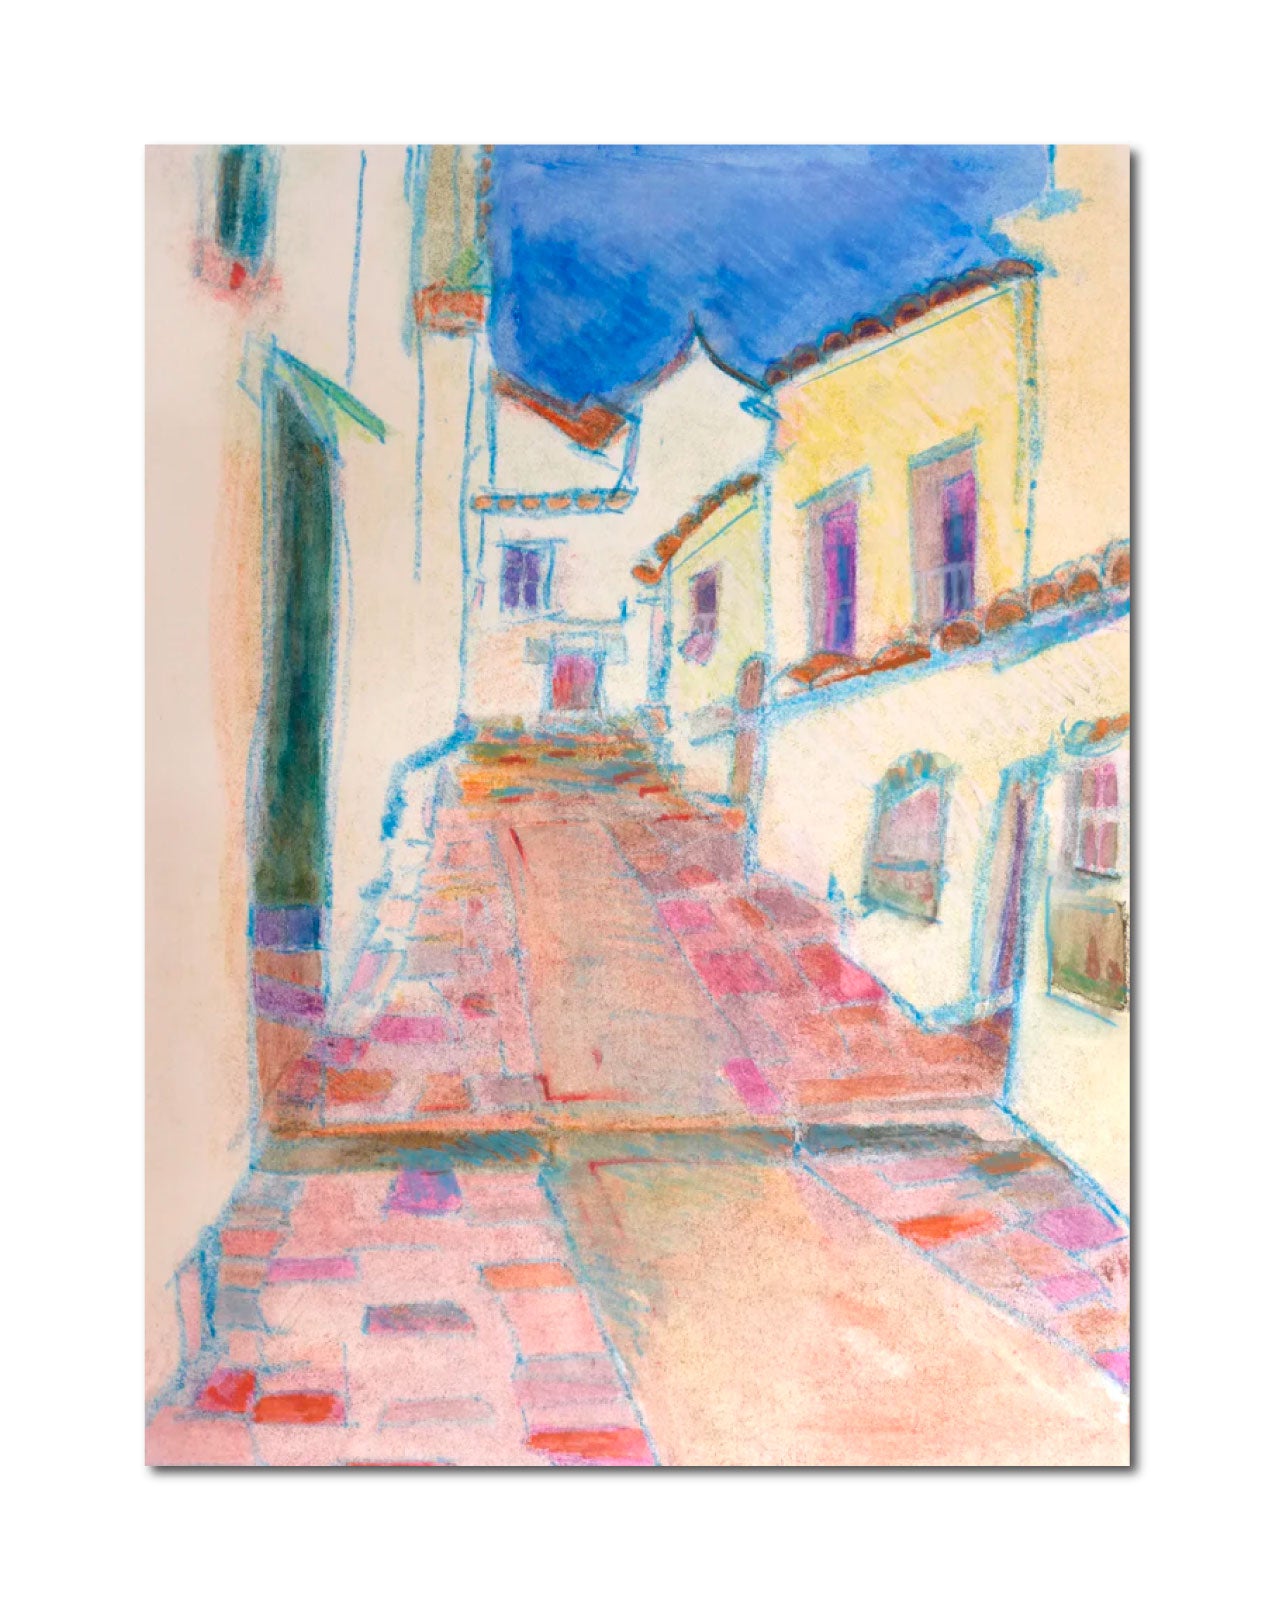 'A COBBLED STREET' - Handmade Original Monoprint with Watercolor and Pencil